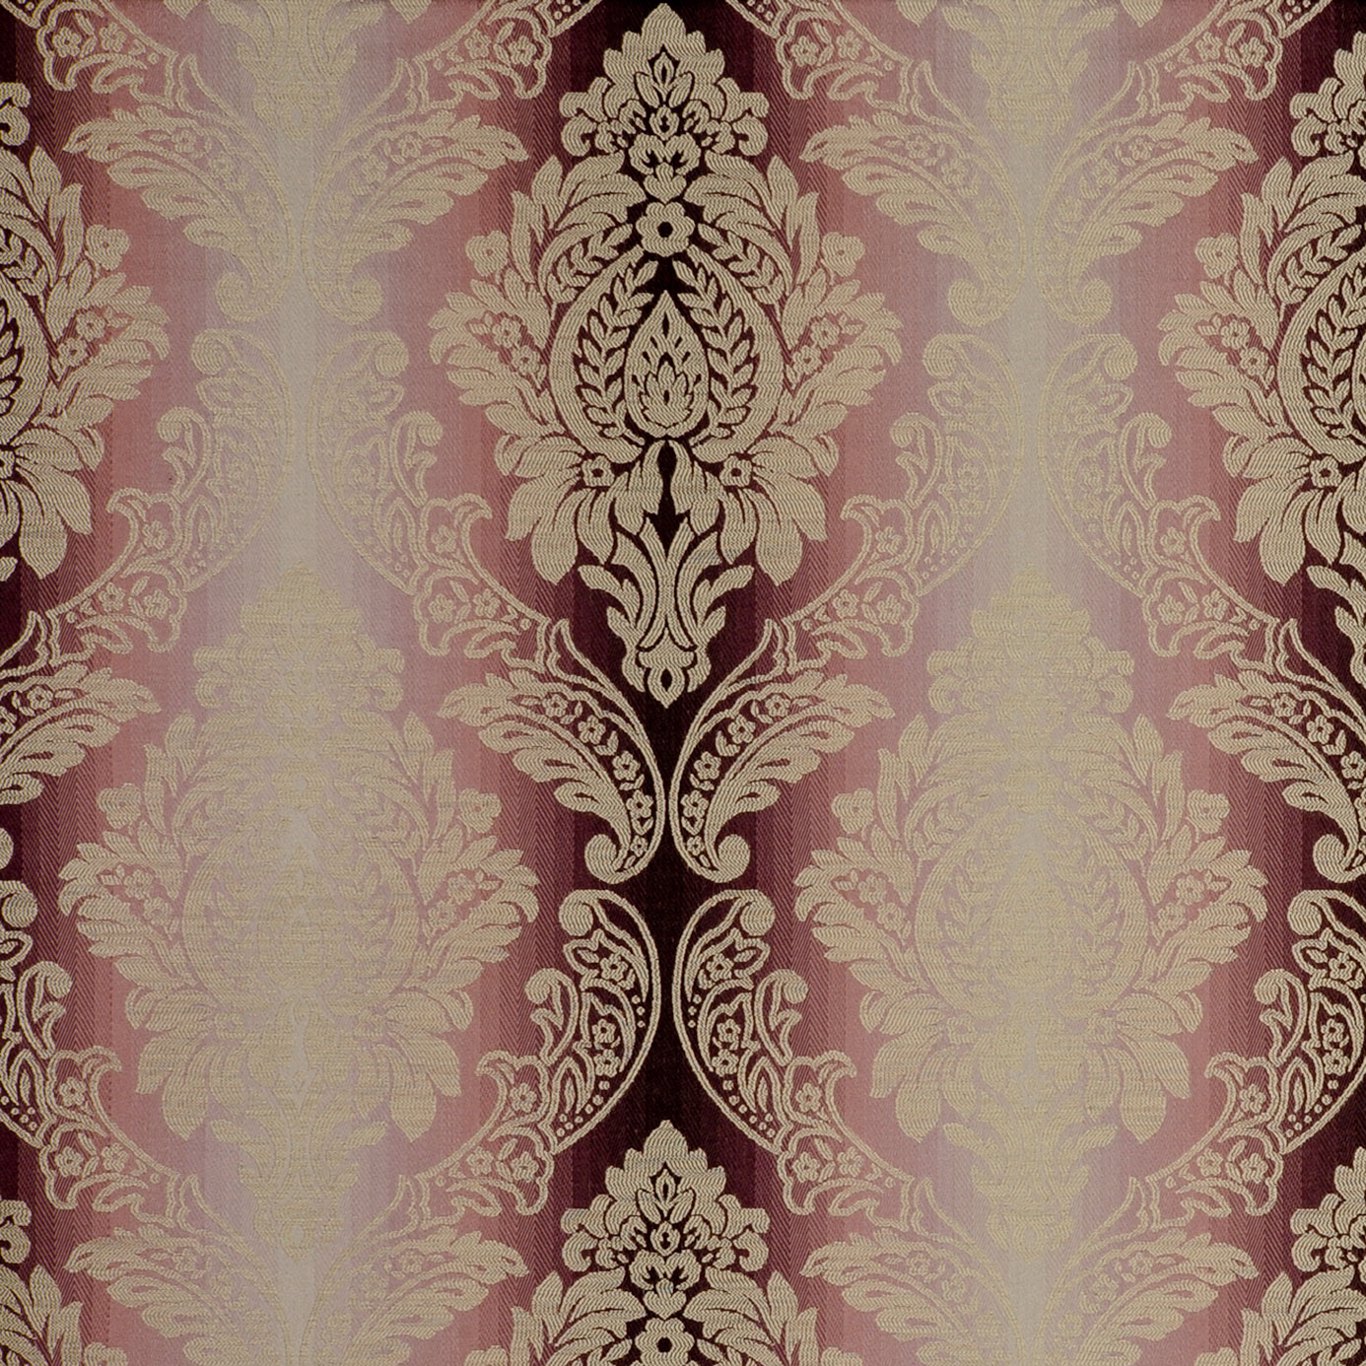 Ornato Orchid Fabric by CNC